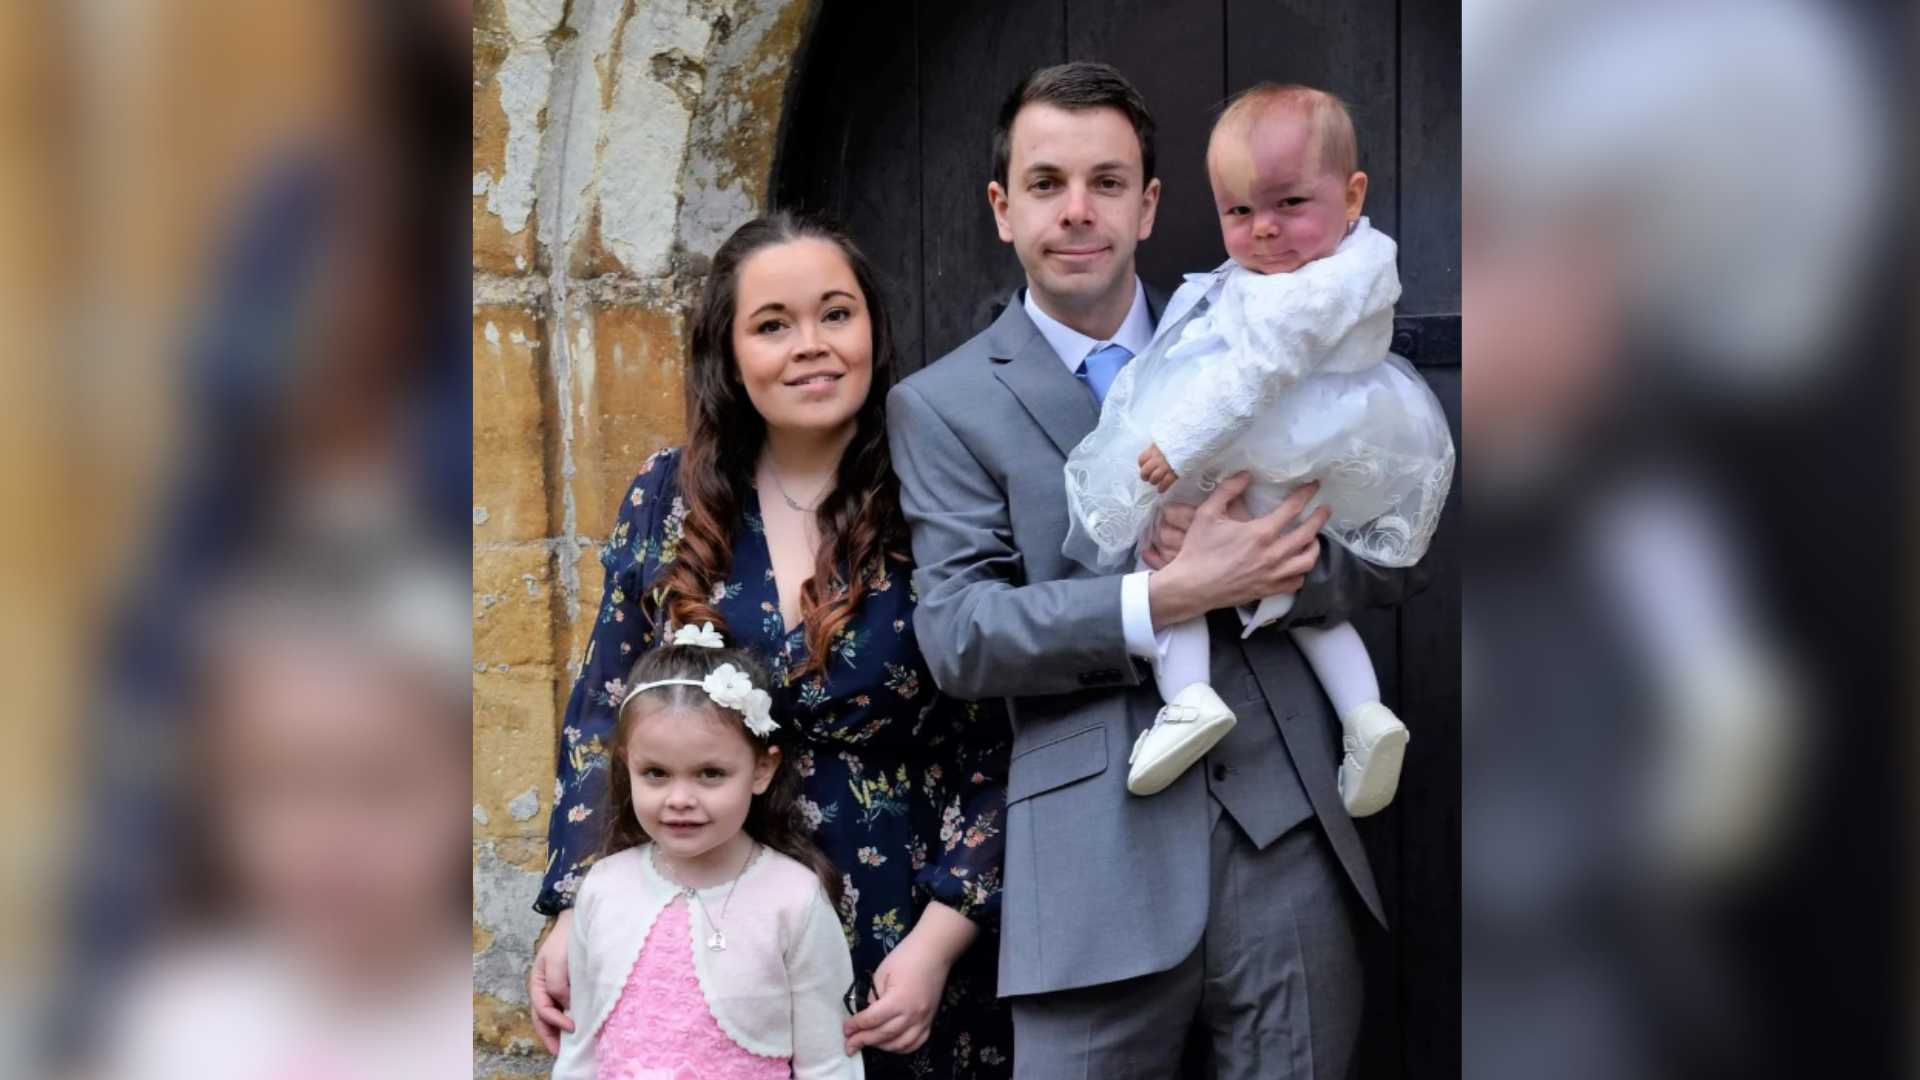 Alice, Dan and their daughters Chloe and Lily at a wedding. They're a brunette family, stood in front of a church door. Lily is held high in her dads arms, smiling cheekily at the camera.